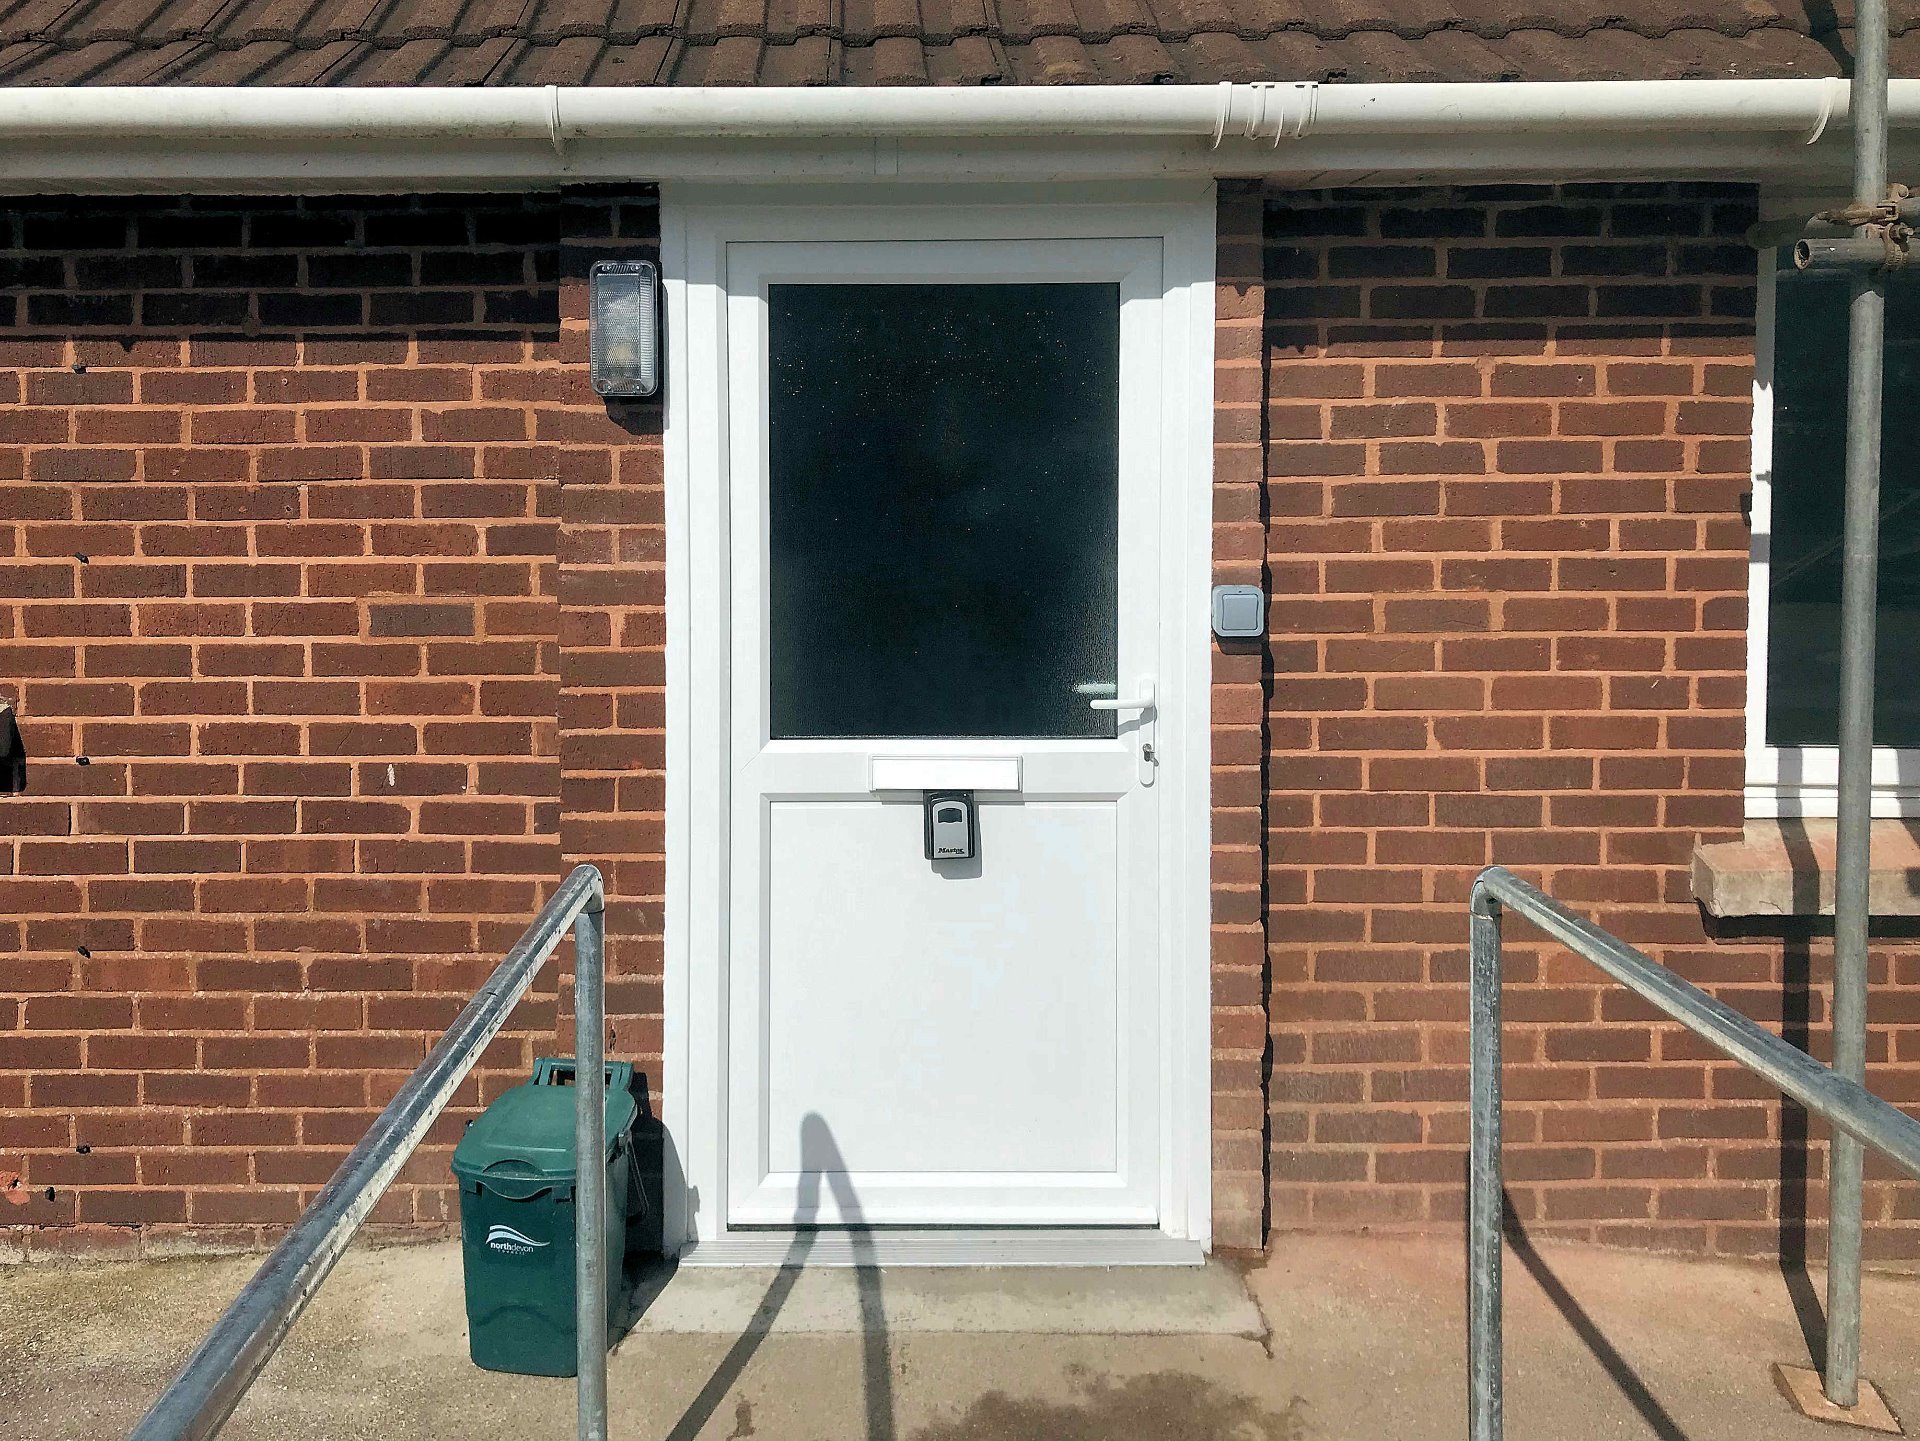 New uPVC front door widened for easy disabled access along with hand rails and outside lighting. North Devon